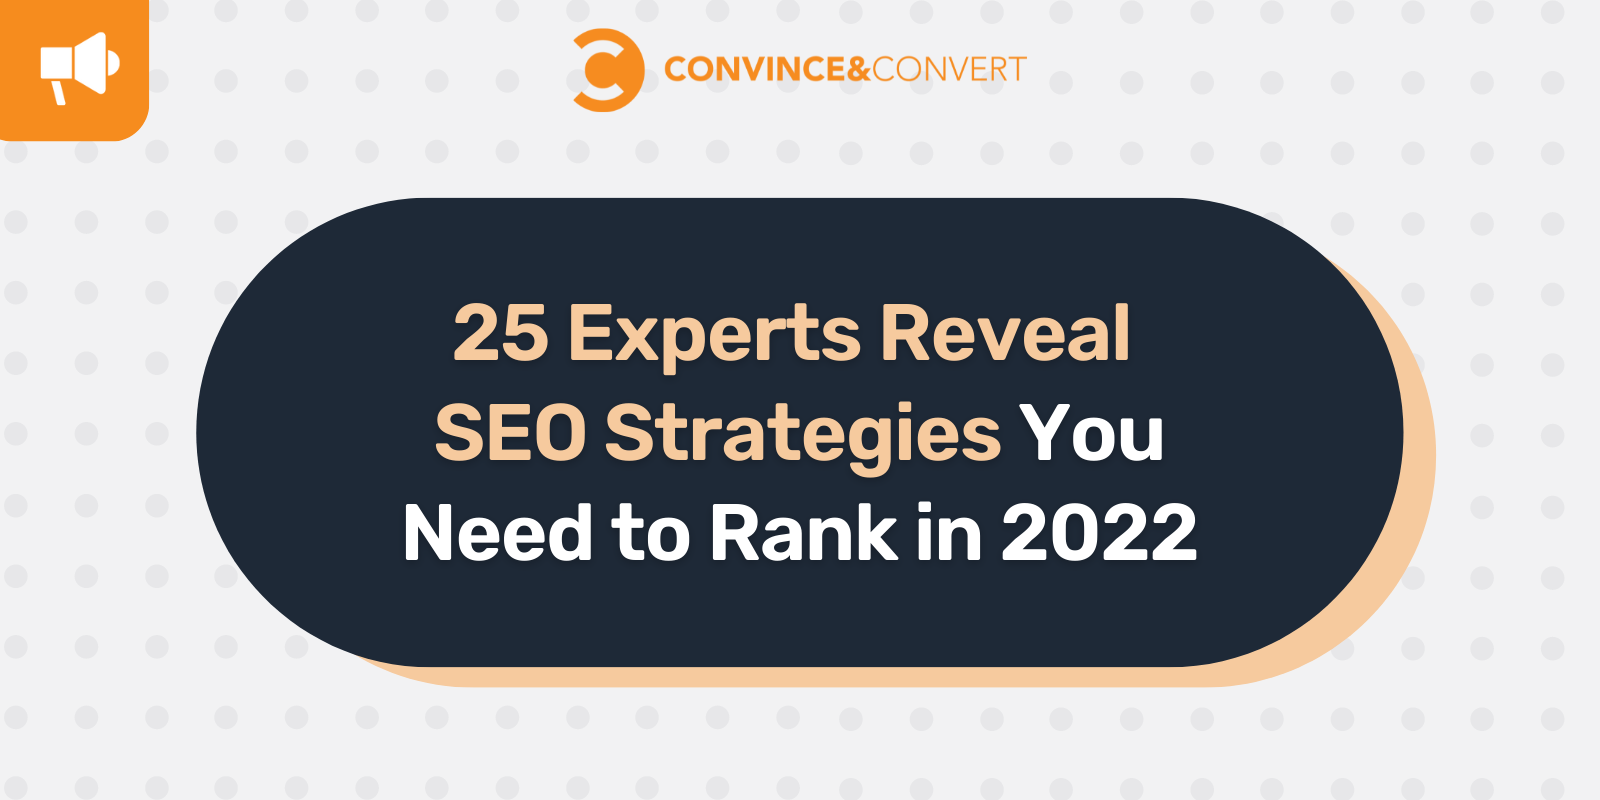 25 Experts Reveal SEO Strategies You Need to Rank in 2022